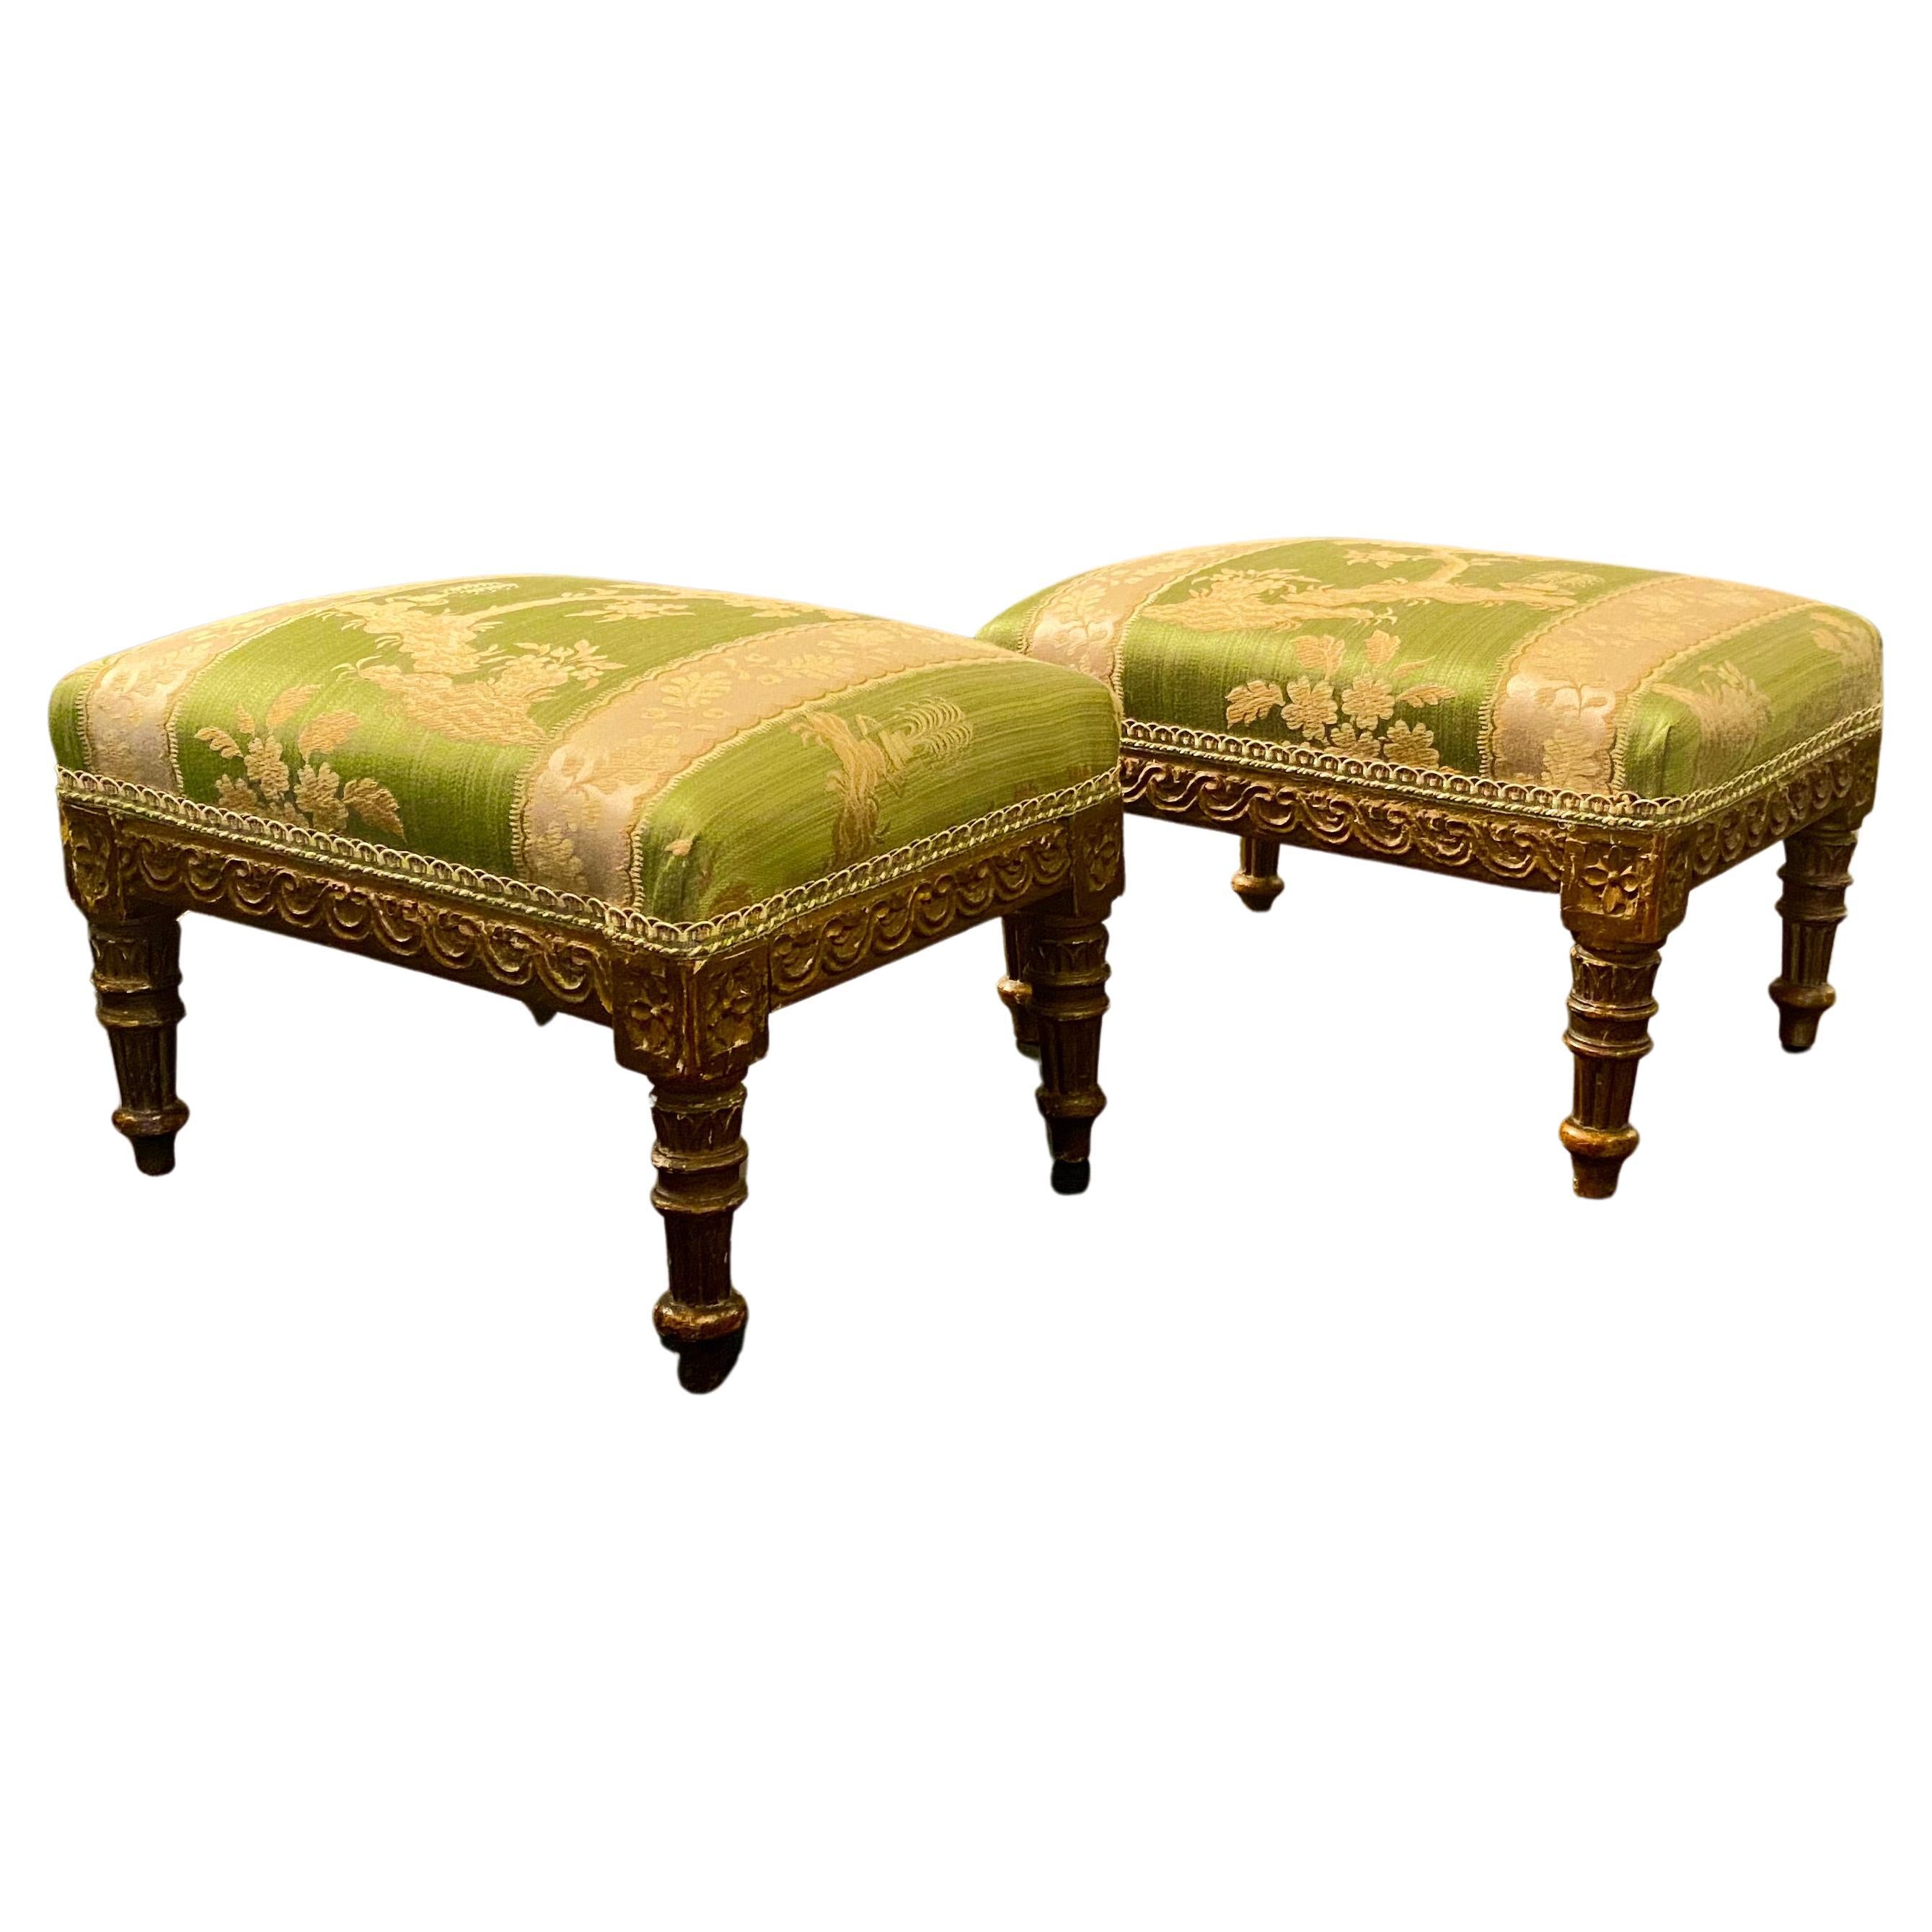 French Louis XVI Style Giltwood Footstools, Green Silk Damask Upholstery For Sale